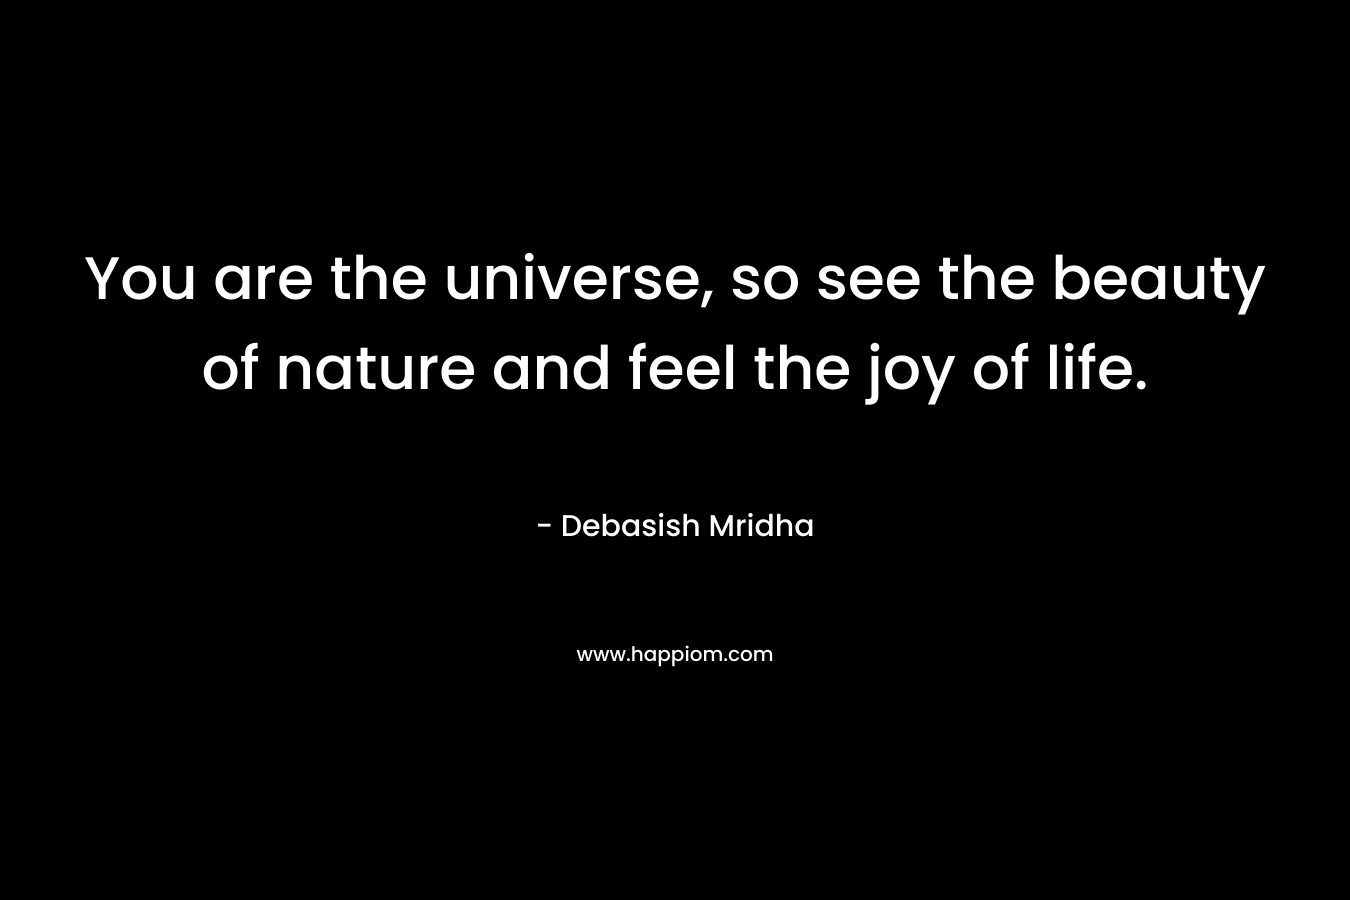 You are the universe, so see the beauty of nature and feel the joy of life.